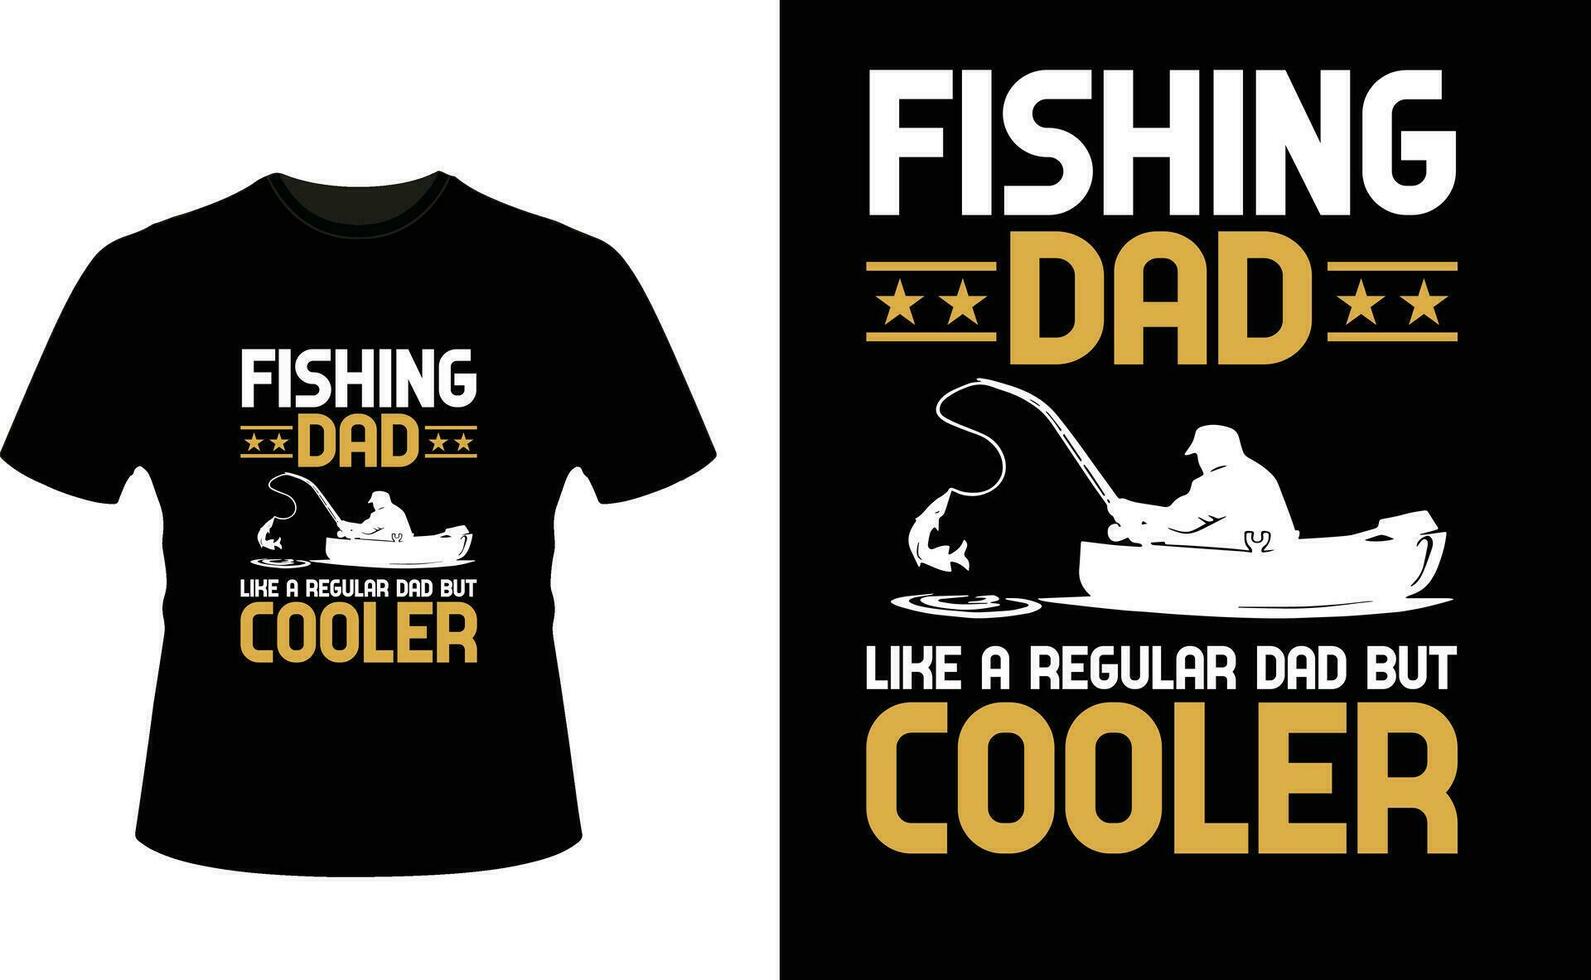 Fishing Dad Like a Regular Dad But Cooler or dad papa tshirt design or Father day t shirt Design vector